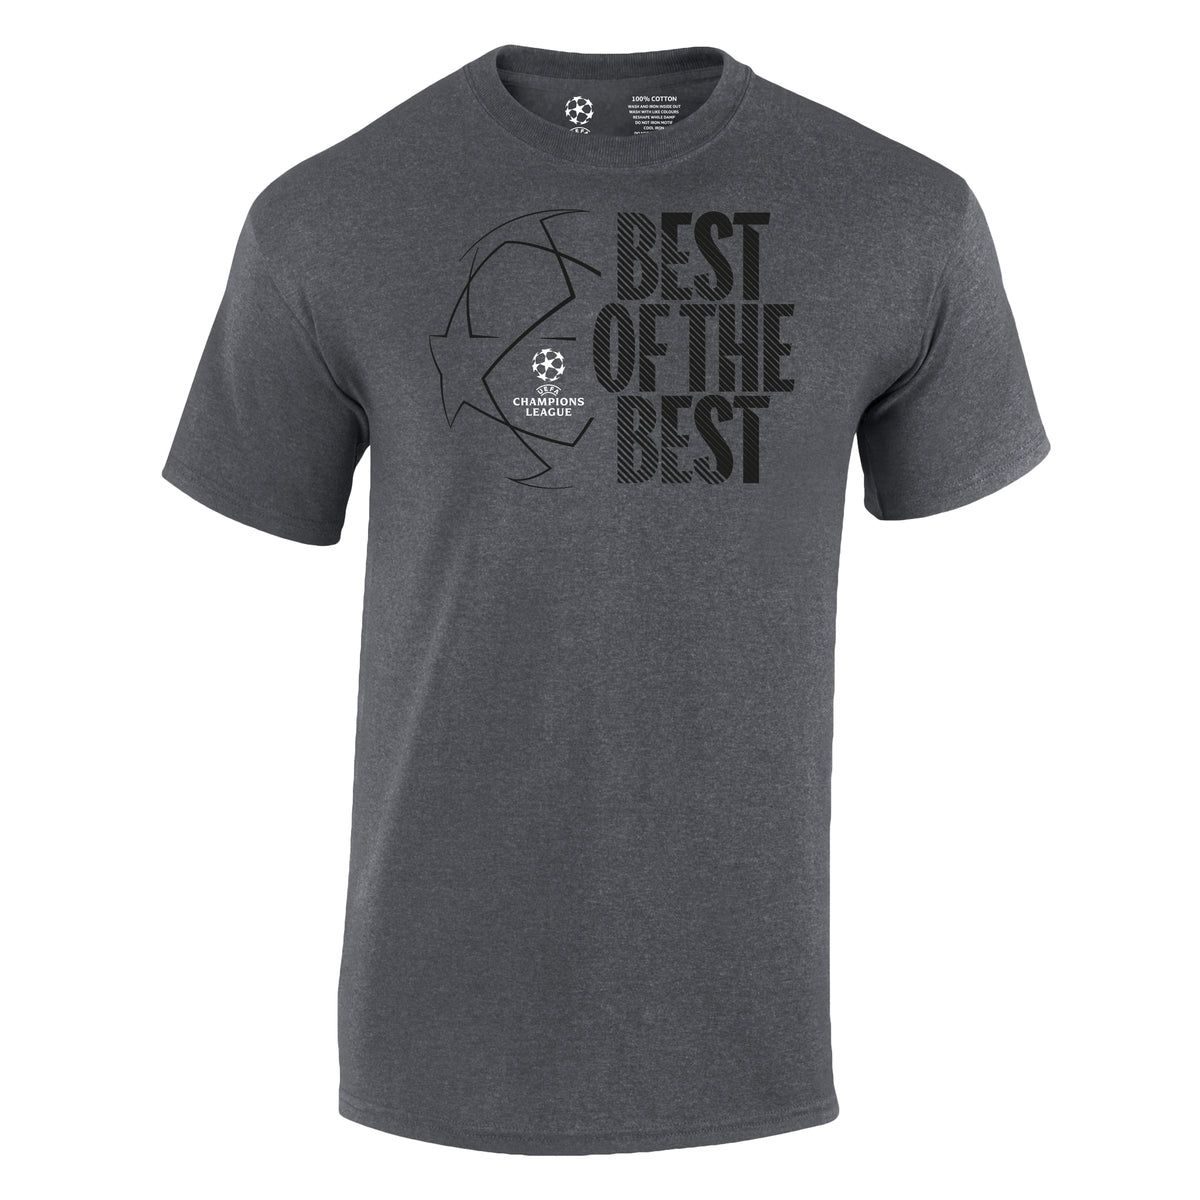 Champions League 'Best of the Best' T-Shirt Charcoal